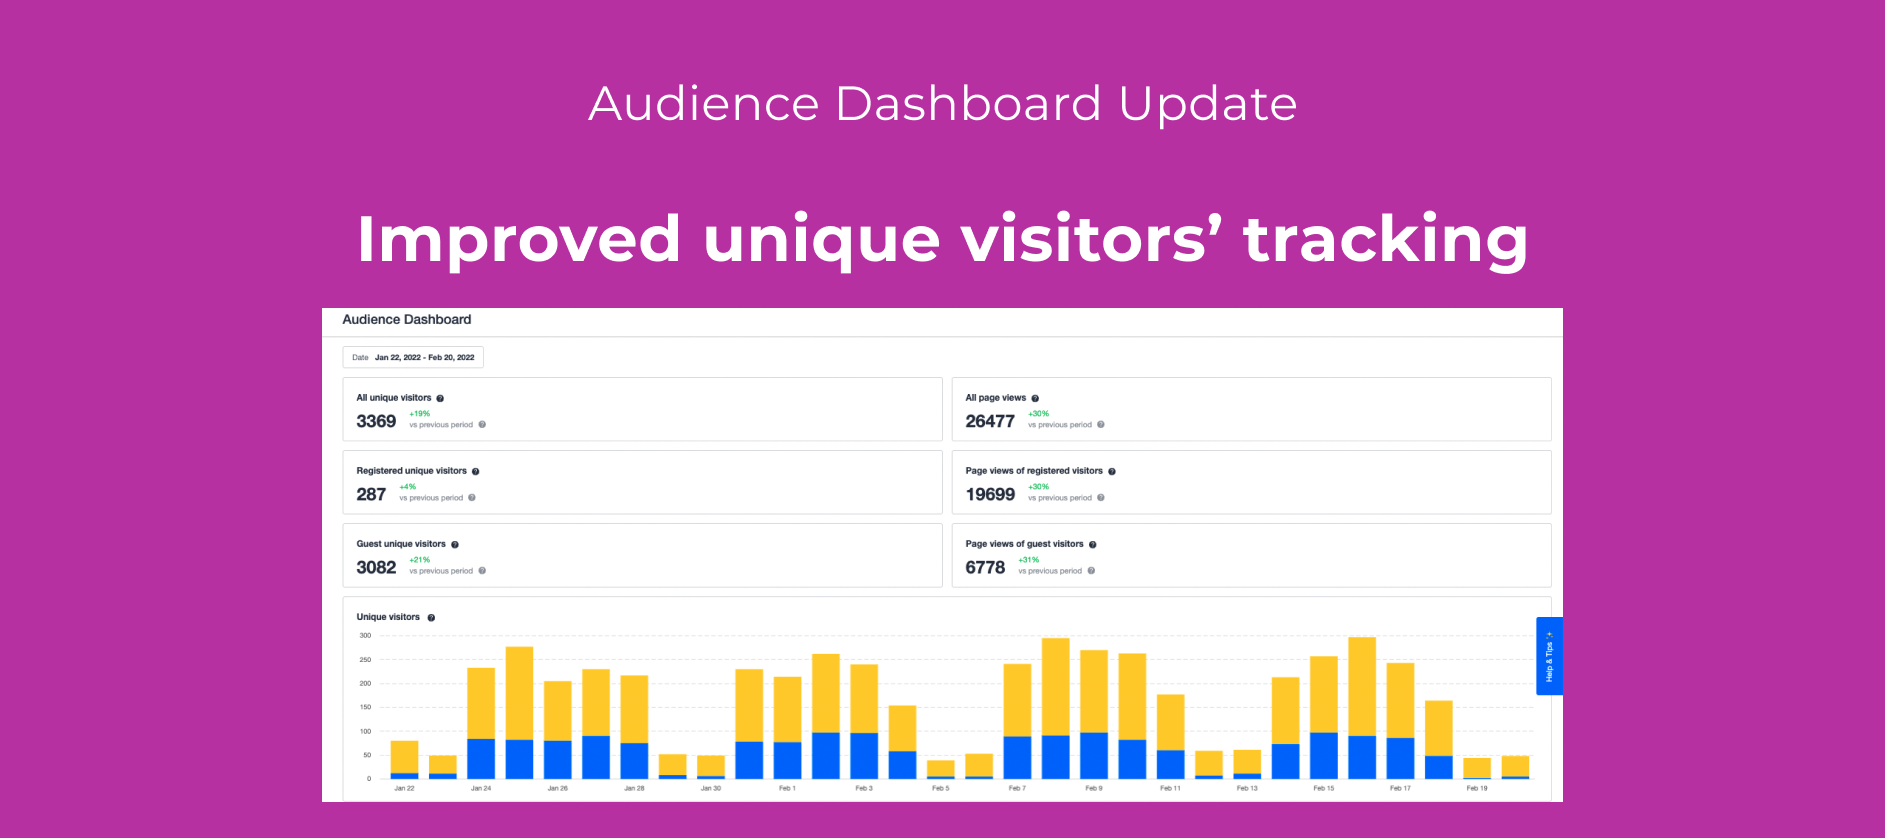 Improved tracking of Unique Visitors in the Audience Dashboard